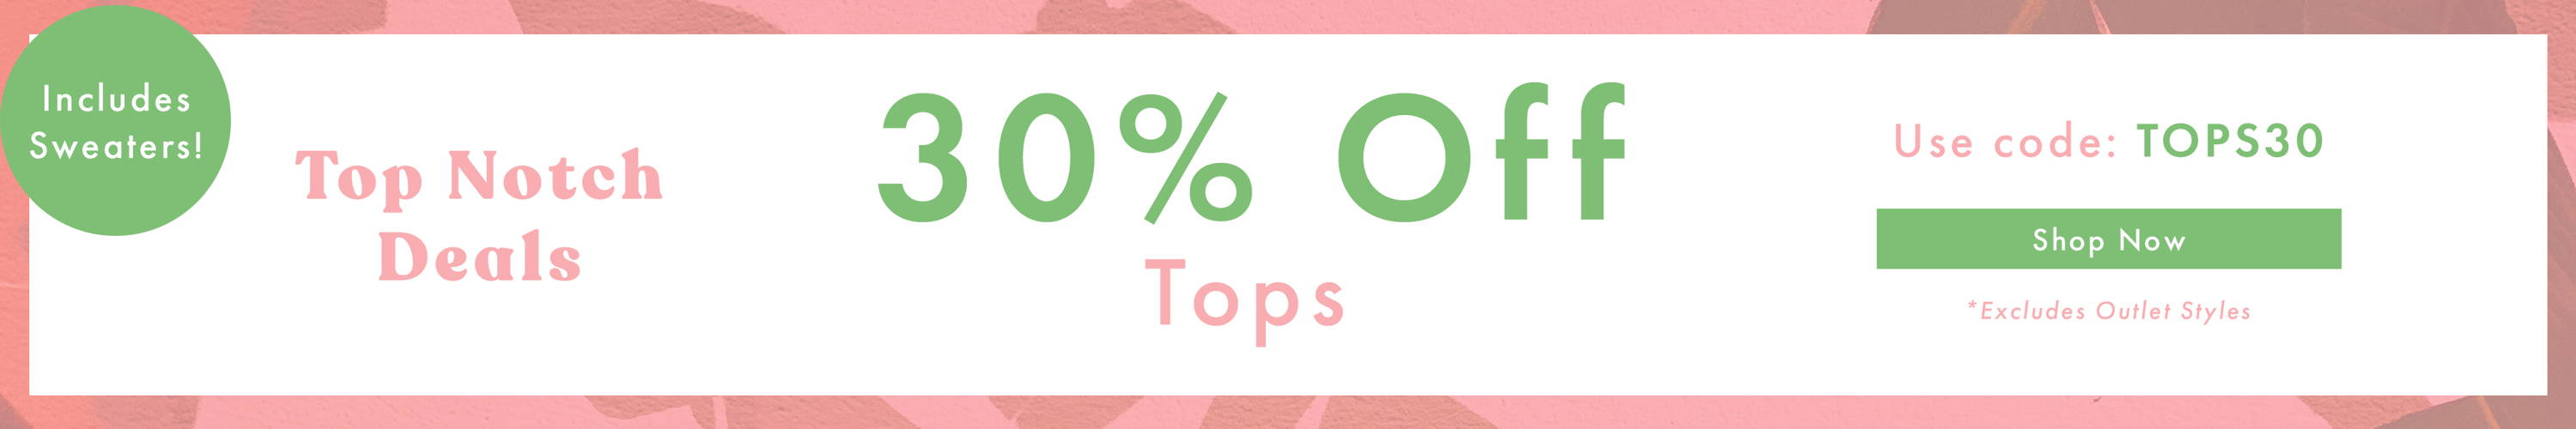 Top Notch Deals - 30% Off Tops [Includes Sweaters!] use code: TOPS30 - SHOP NOW *Excludes Outlet Styles